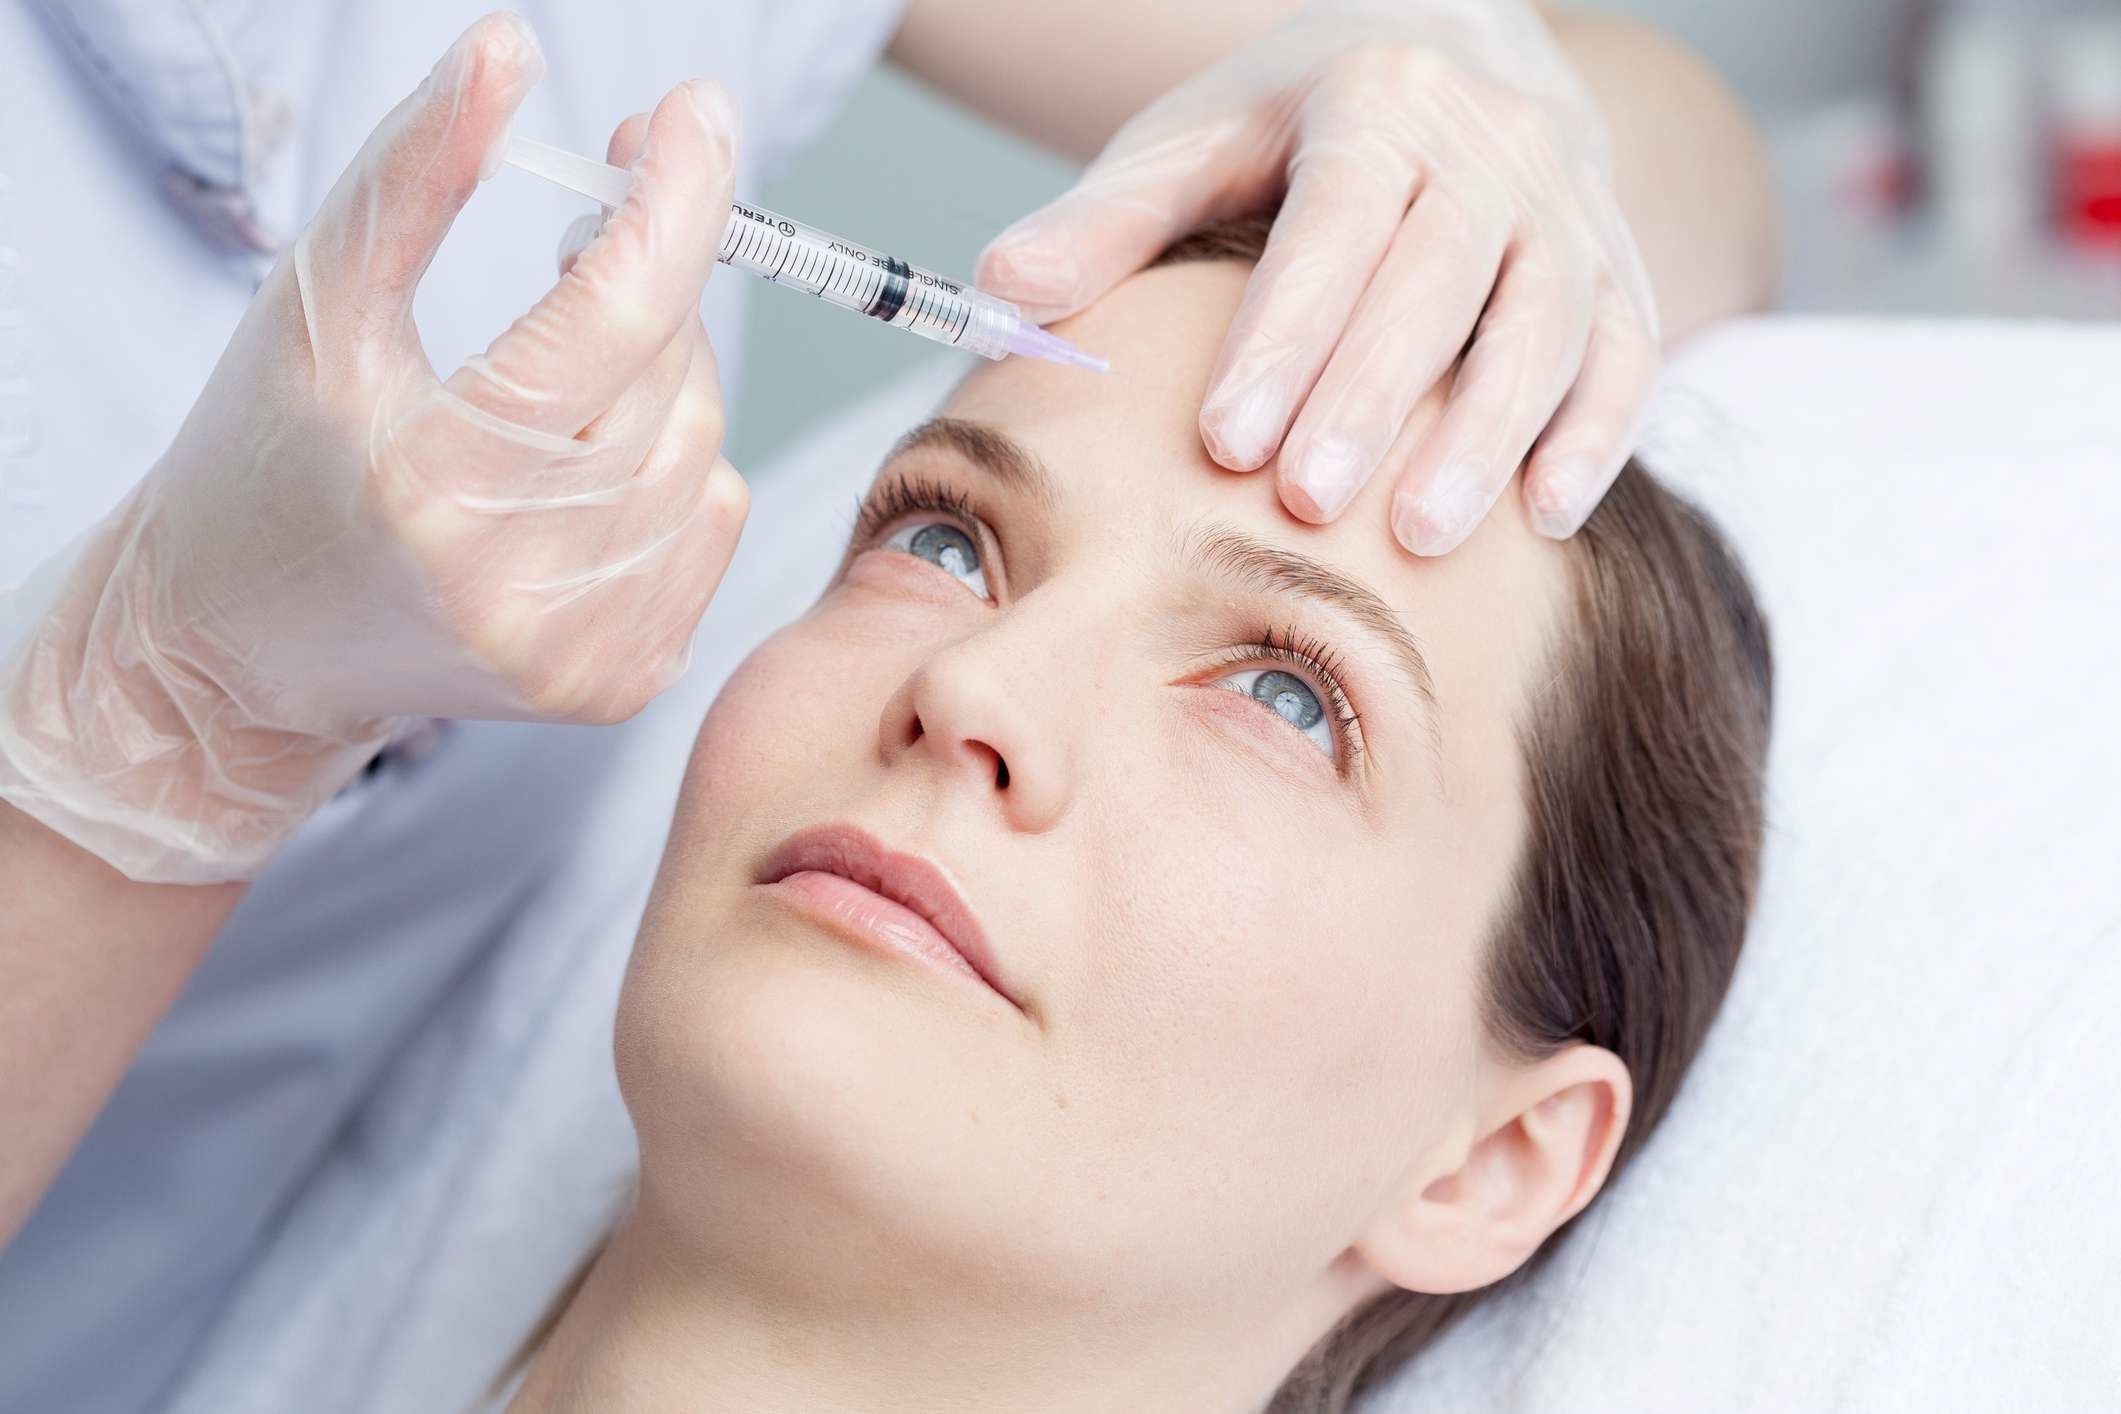 10 things you need to know before getting Botox Injections